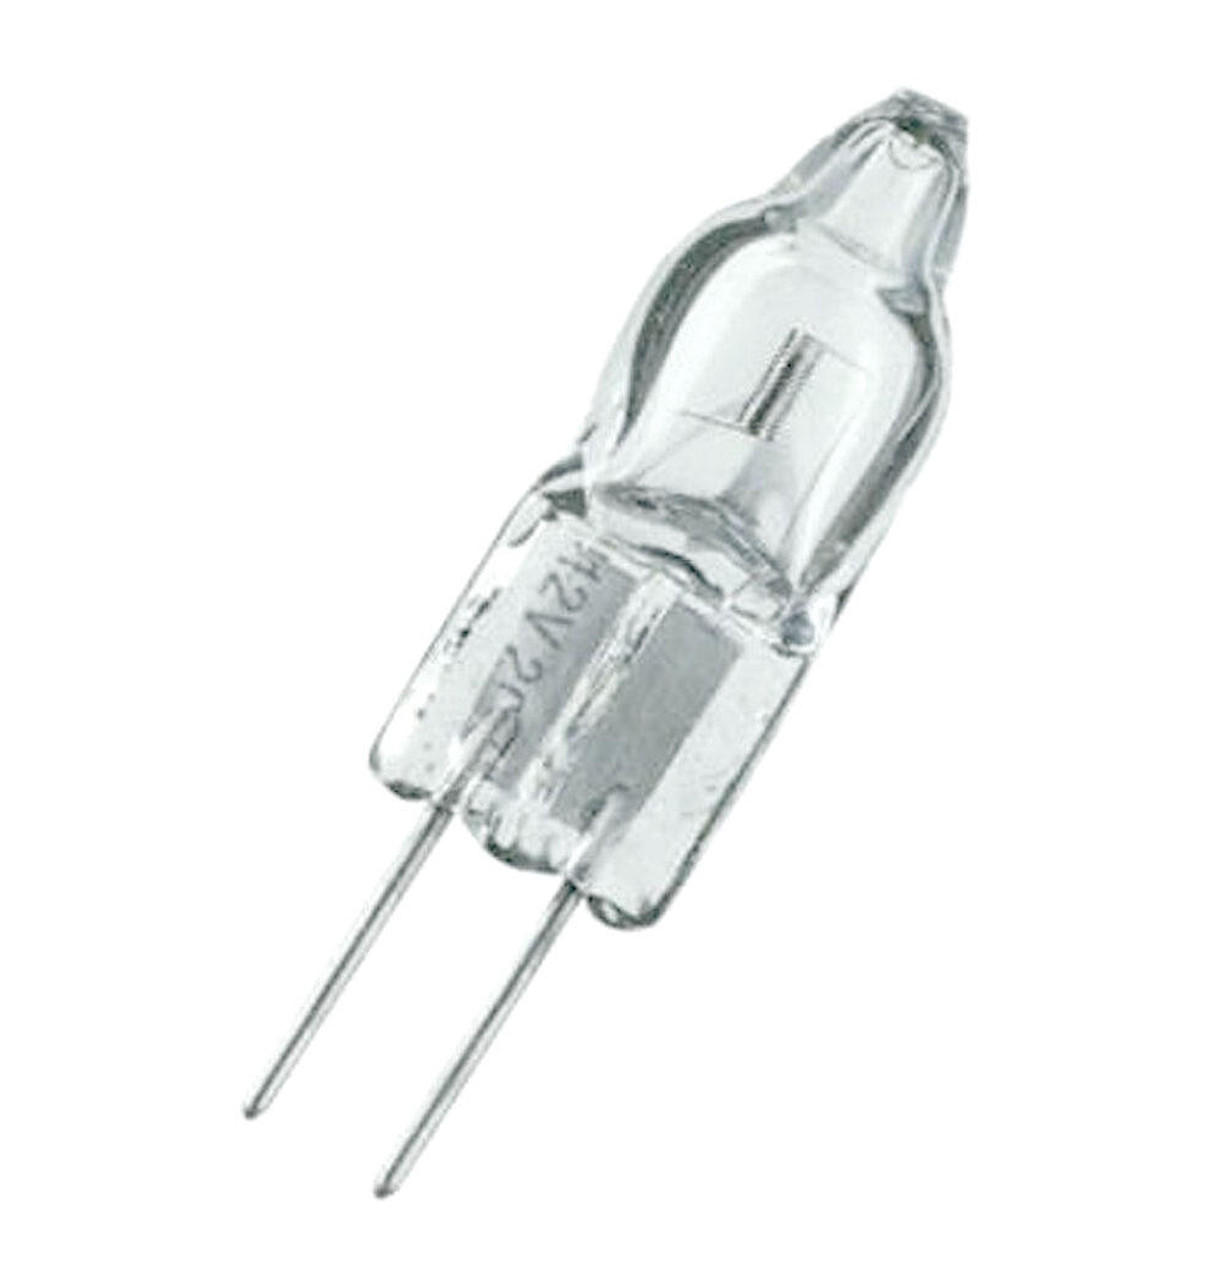 https://cdn11.bigcommerce.com/s-b4l39fmg4b/images/stencil/1280x1280/products/1458/57565/osram-halogen-oven-g4-capsule-10w-12v-dimmable-halostar-warm-white-clear-2634-4050300308081__17382.1642554566.jpg?c=2